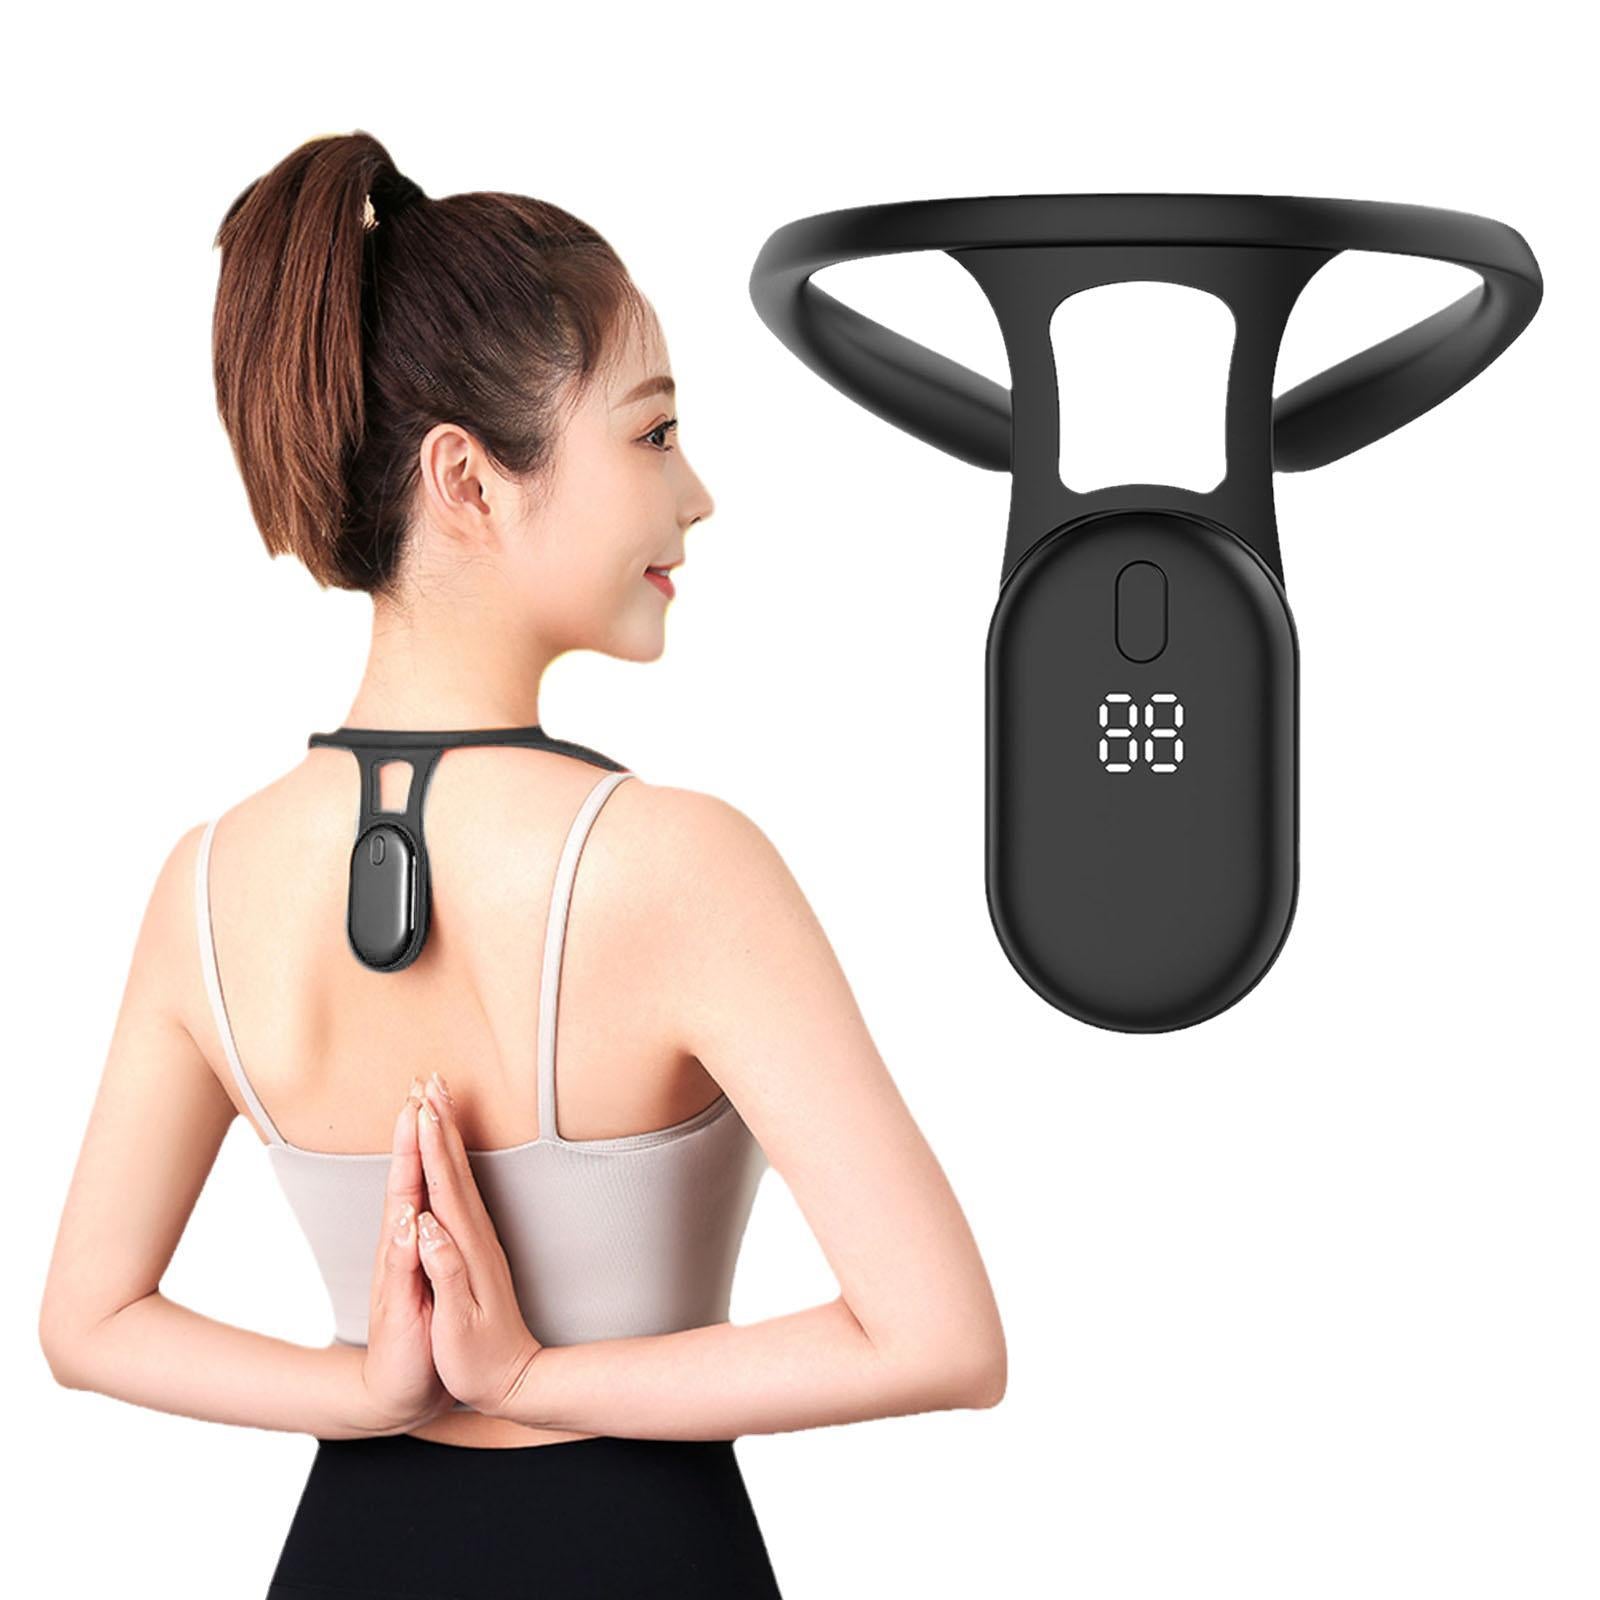 SLIMORY Ultrasonic Lymphatic Soothing Neck Instrument